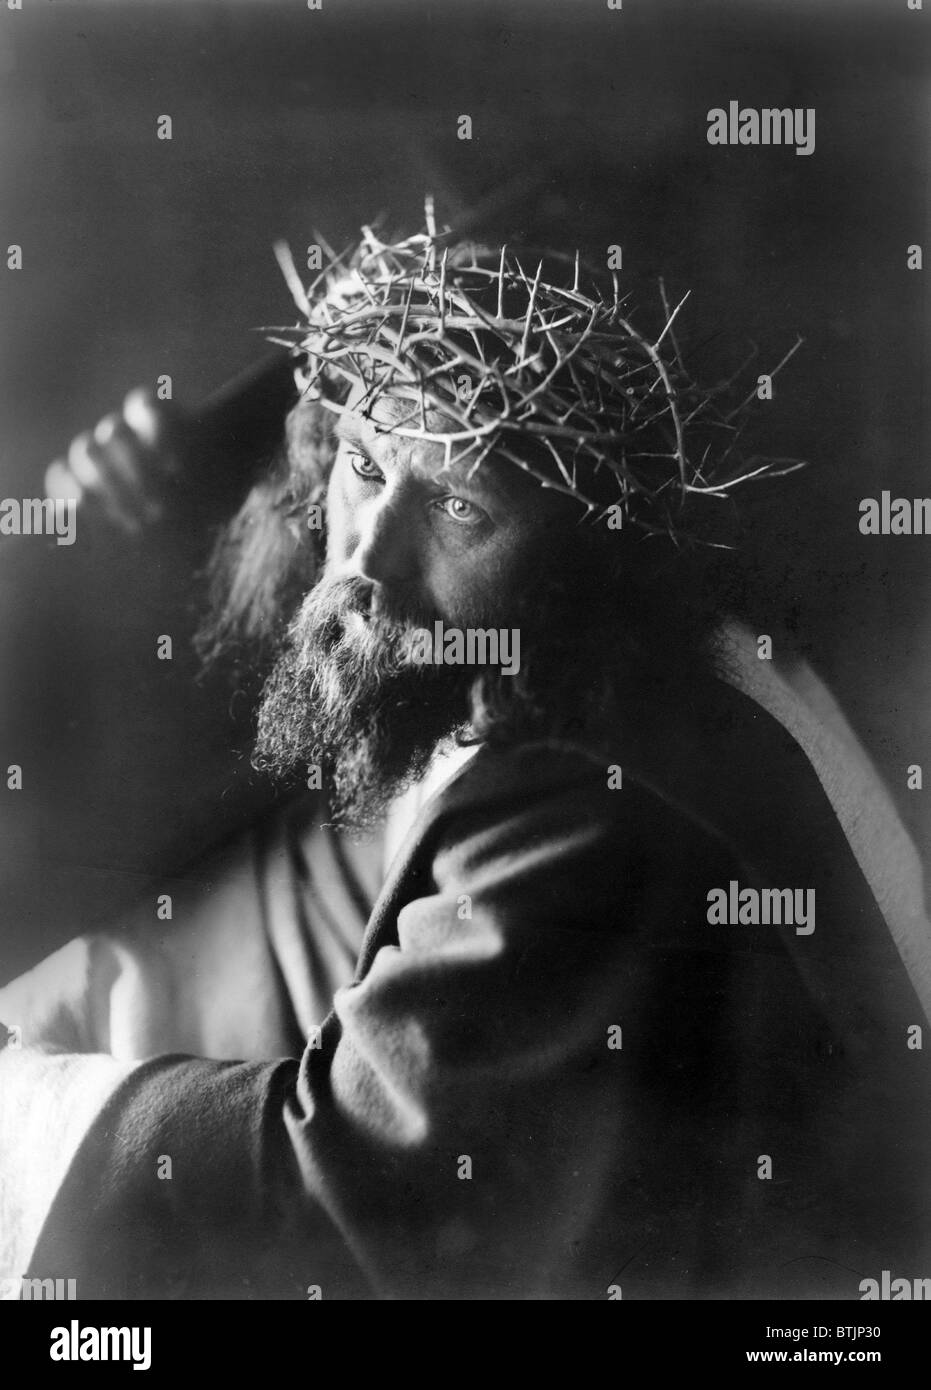 Jesus Christ, man personifying Jesus Christ, wearing crown of thorns and carrying cross, circa 1910. Stock Photo